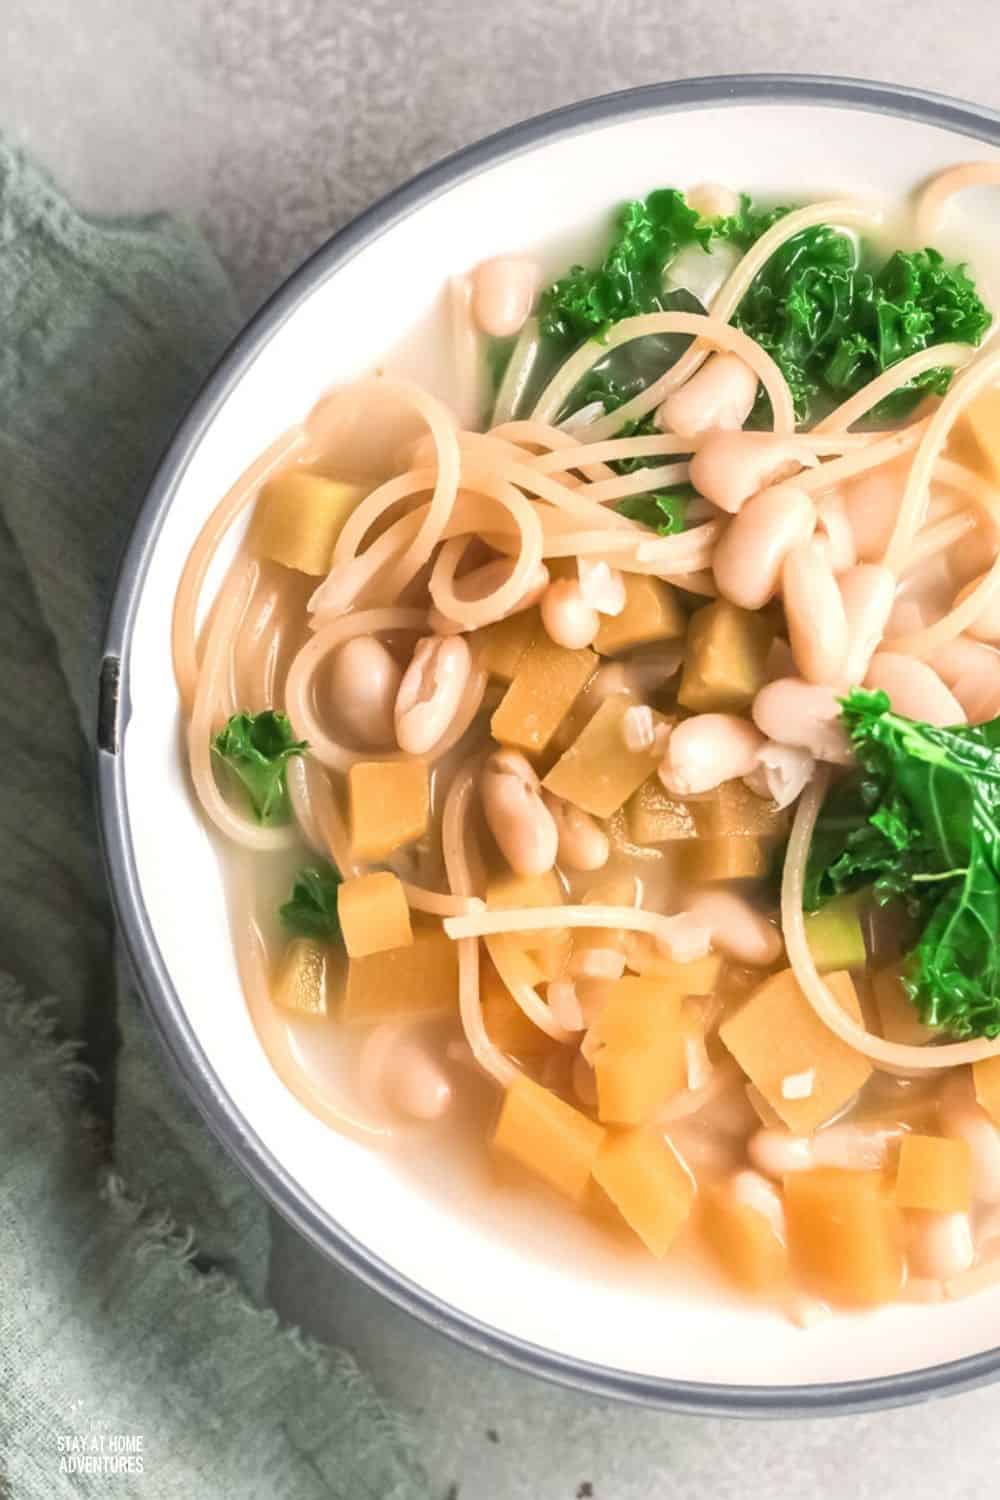 Porotos con rienda is a soup/stew made of boiled beans, spaghetti, pumpkin, onion, and greens of some sort. #soup #Chileanrecipe #beansoup #meatlesssoup via @mystayathome